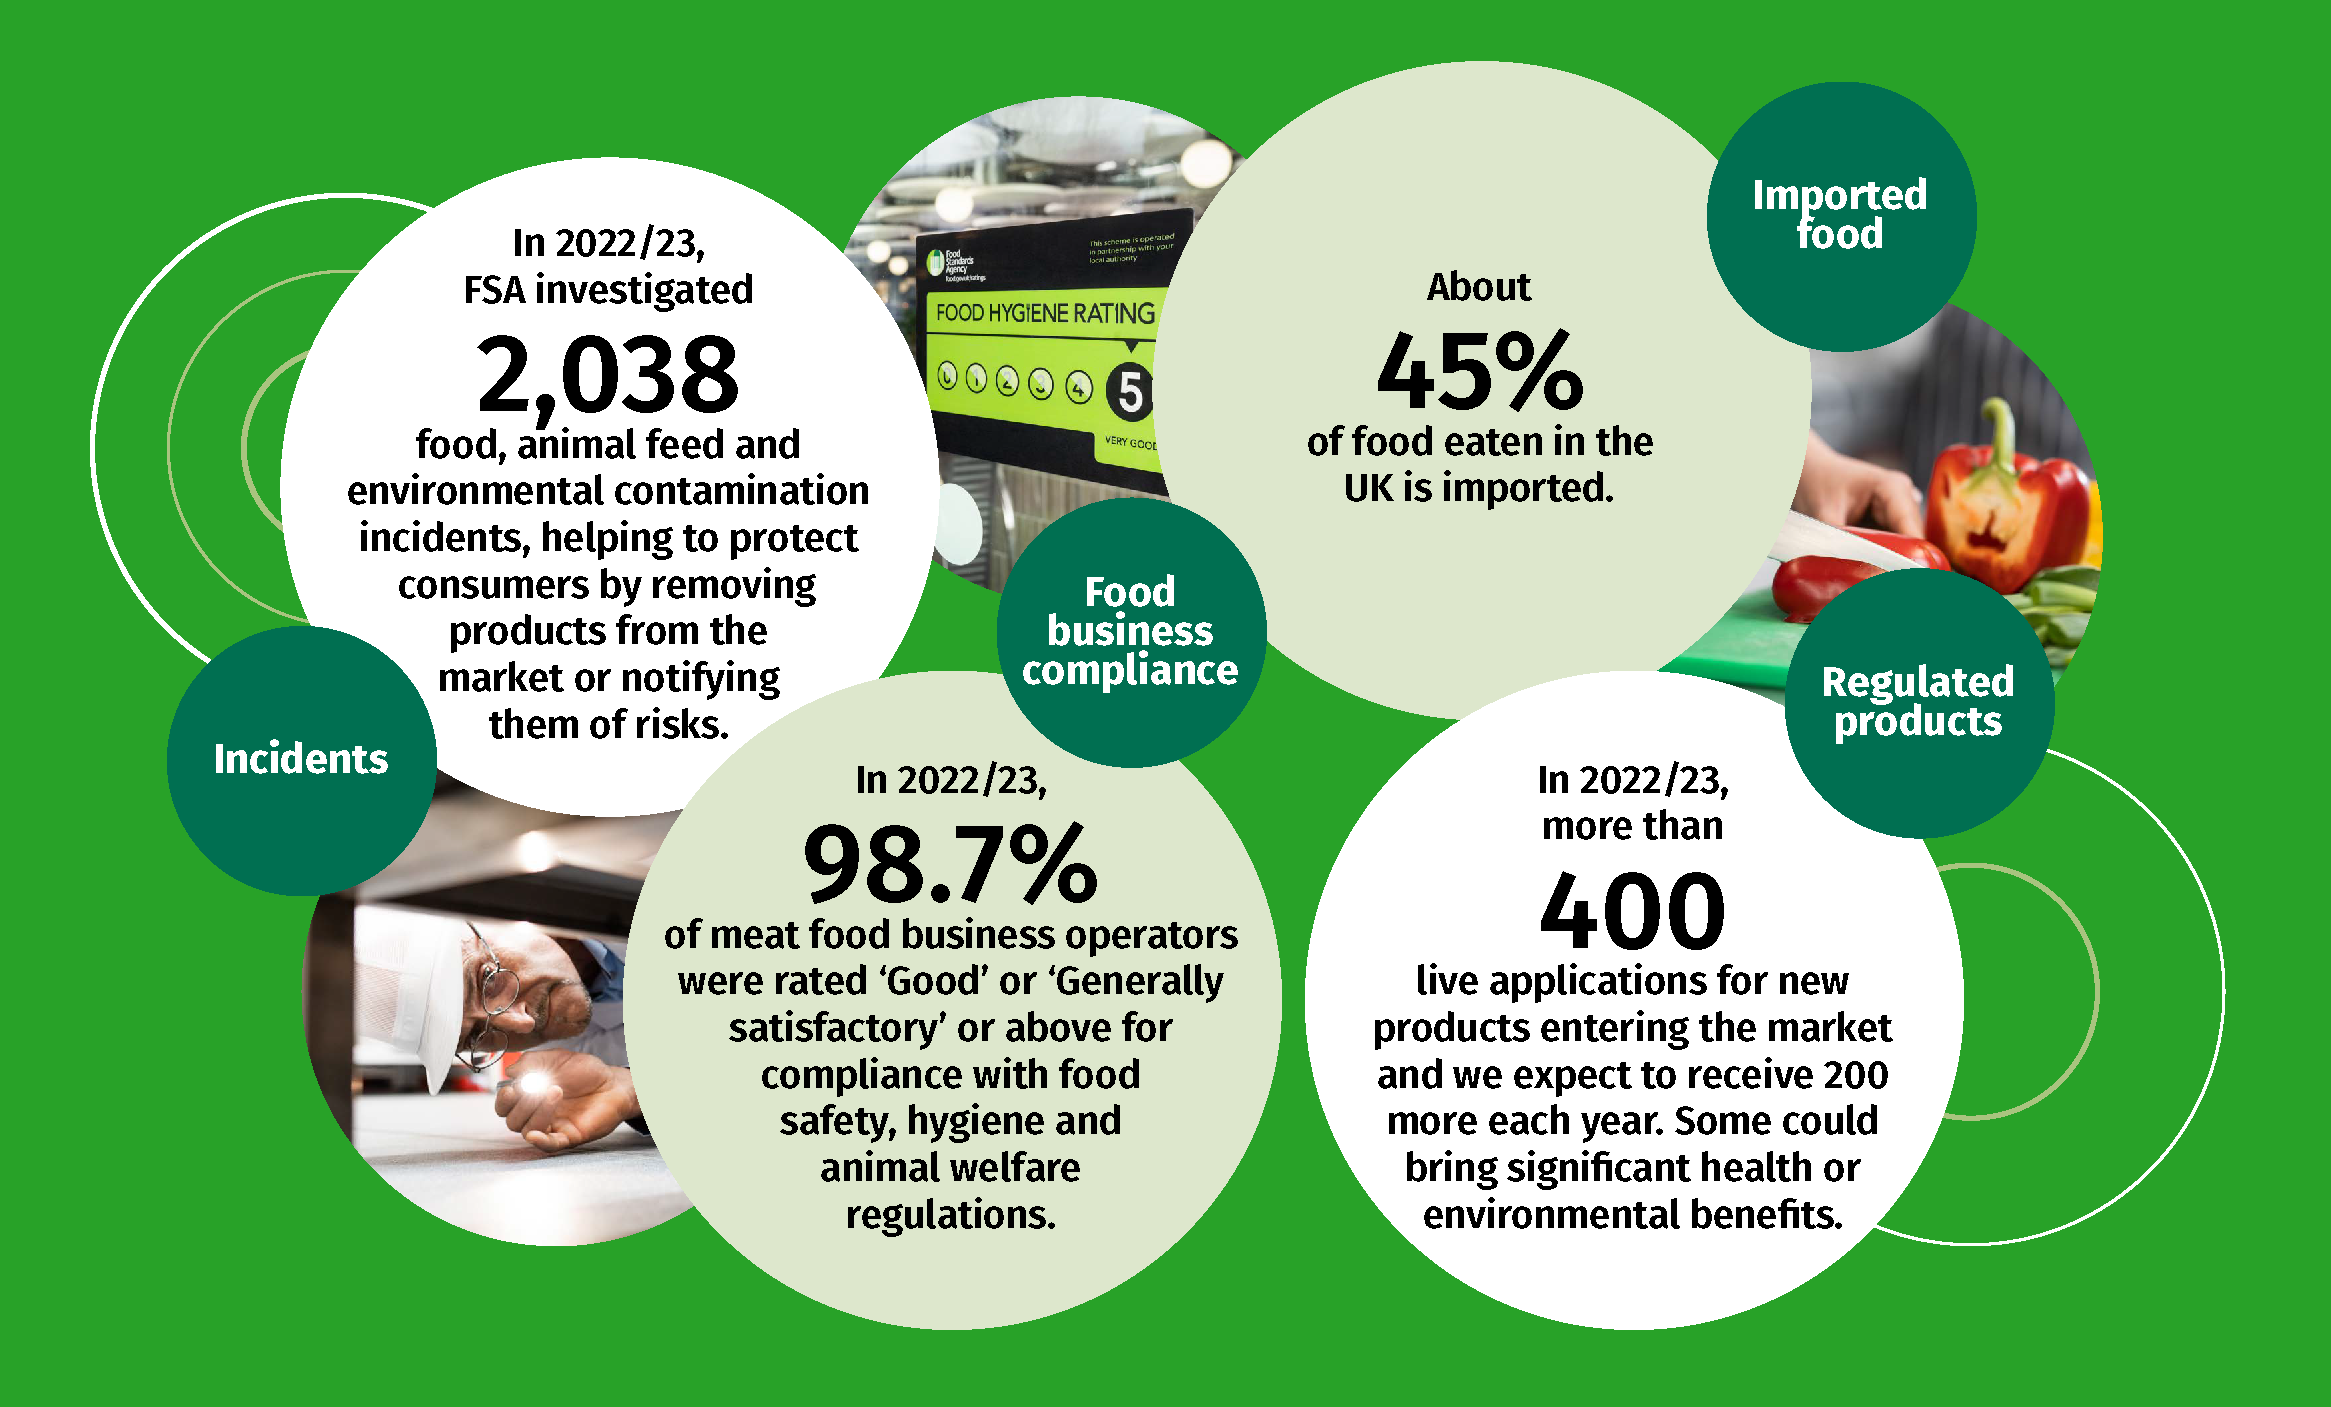 A green and white infographic with white circles and text.   Incidents - In 2022/23, FSA investigated 2038 food, animal feed and environmental contamination incidents, helping to protect consumers by removing products from the market or notifying them of risks.  Imported food - About 45% of food eaten in the UK is imported.  Food business compliance - In 2022/23, 98.7% of meat food business operators were rated ‘Good’ or ‘Generally satisfactory’ or above for compliance with food safety, hygiene and animal w